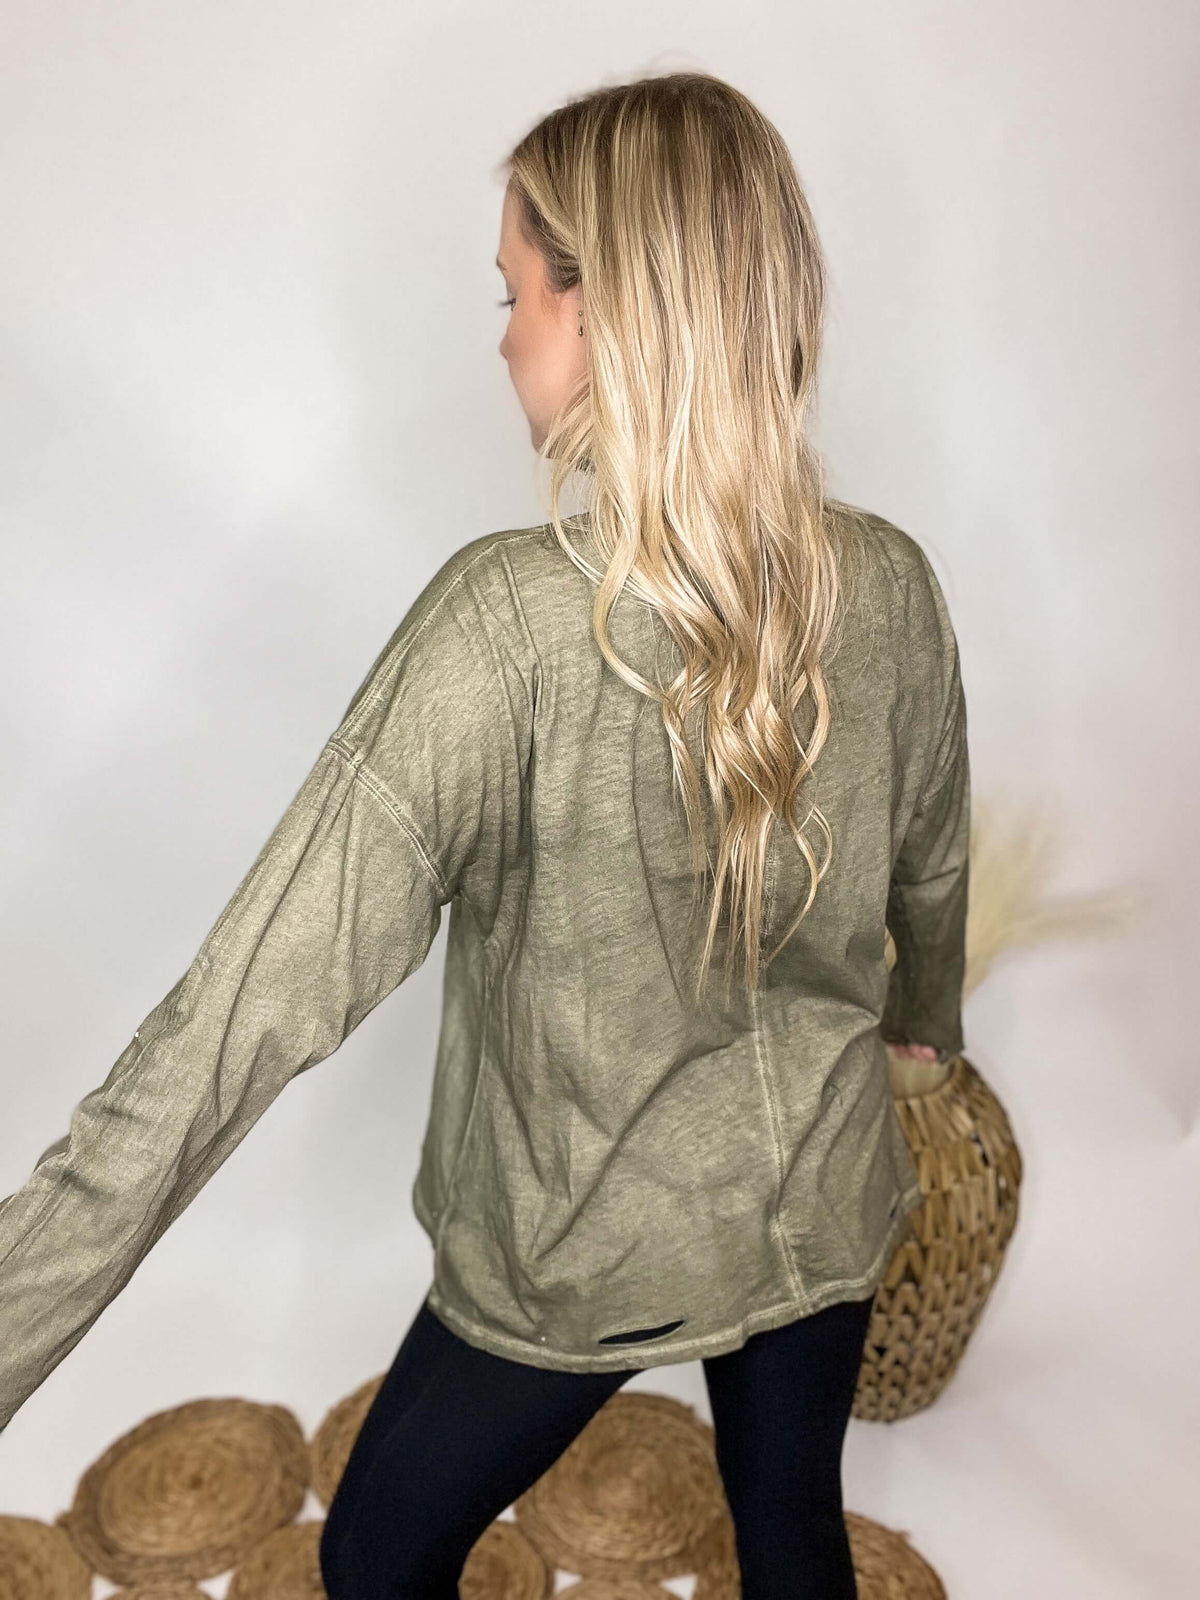 Stone Olive Garment Dyed Mock Neck Long Sleeve Top Distressed Hem Relaxed Loose Fit 100% Cotton